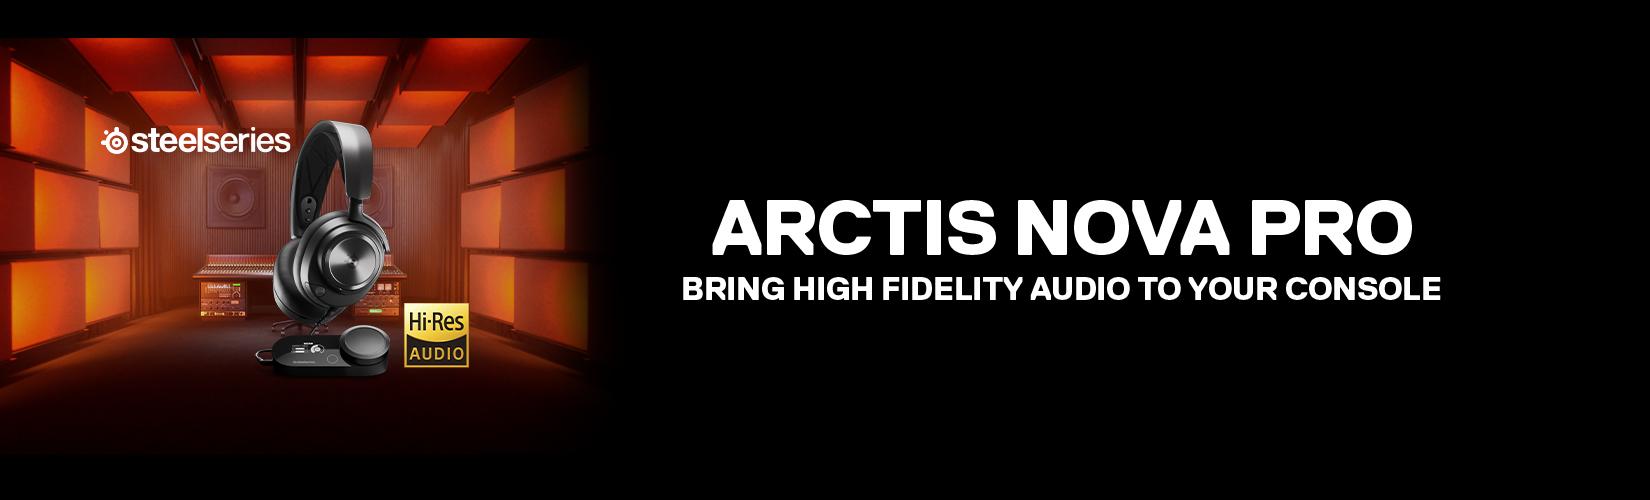 Steelseries. Arctis nova pro. Bring high fidelity audio to your console.